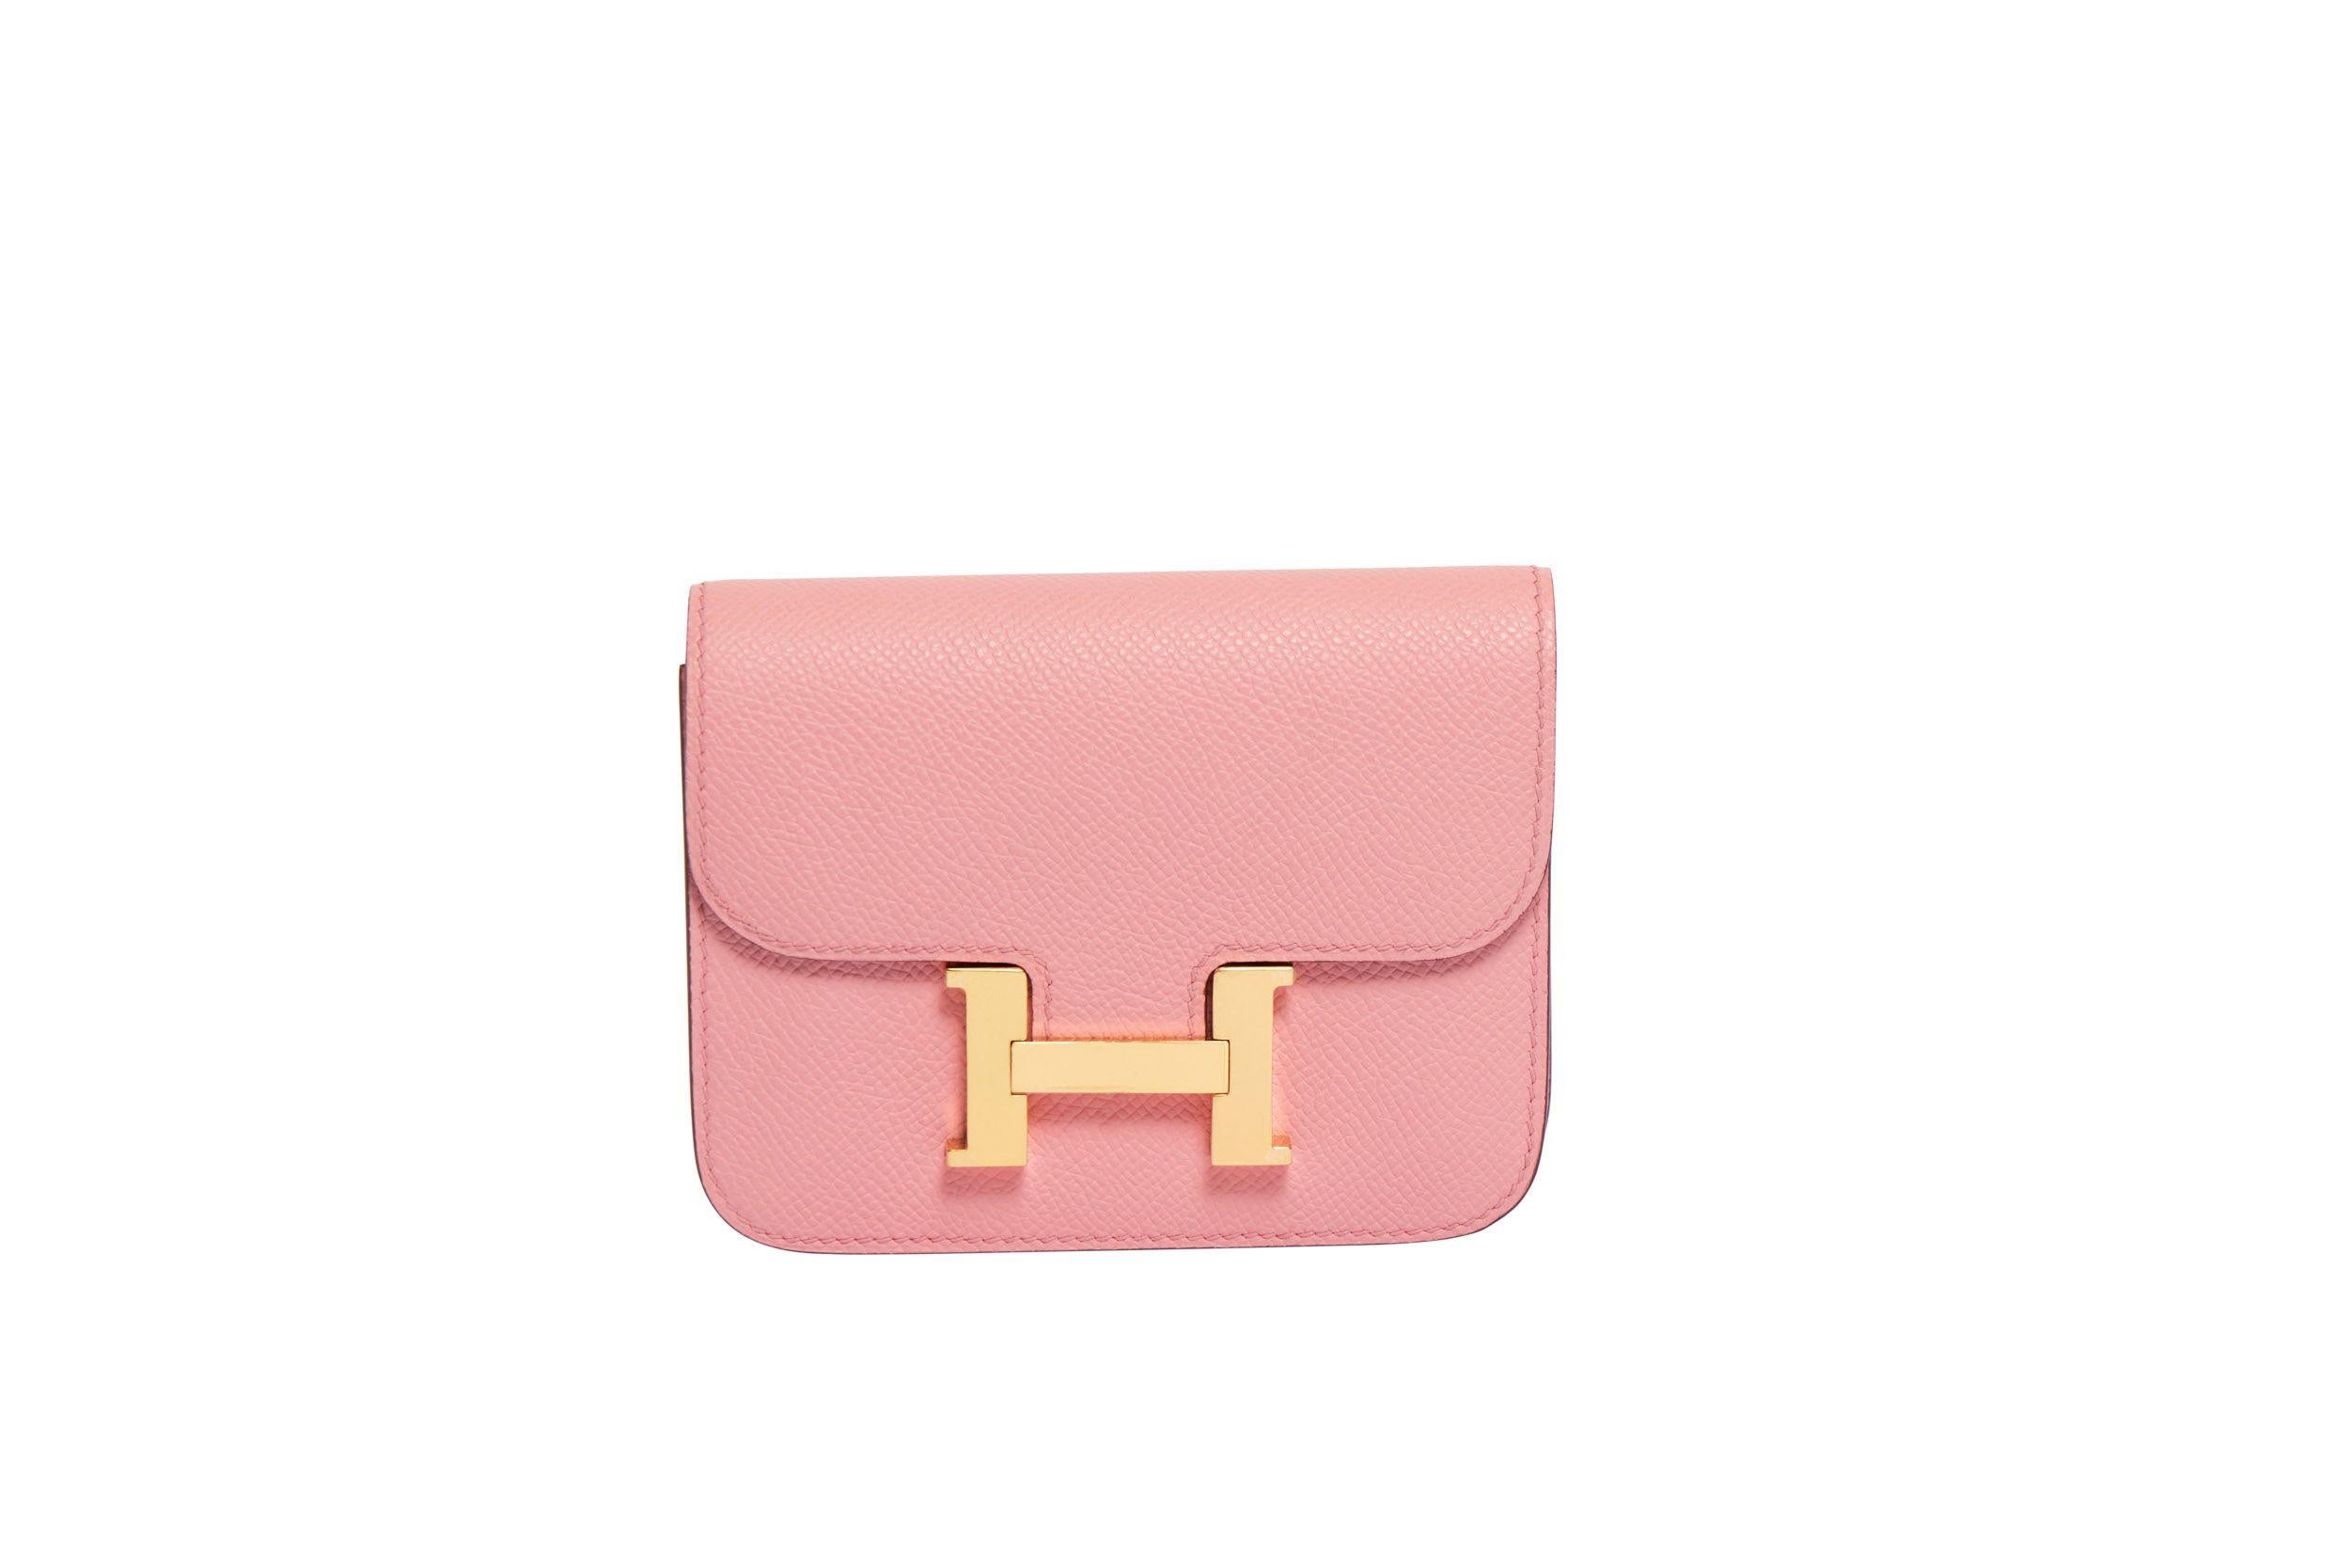 Hermes Epsom Constance mini pink leather pochette with a detachable card case inside. Gold metale hardware and H logo Removable and adjustable pink azalee leather belt with gold metal H logo buckle. Comes with original box and dust cover and ribbon